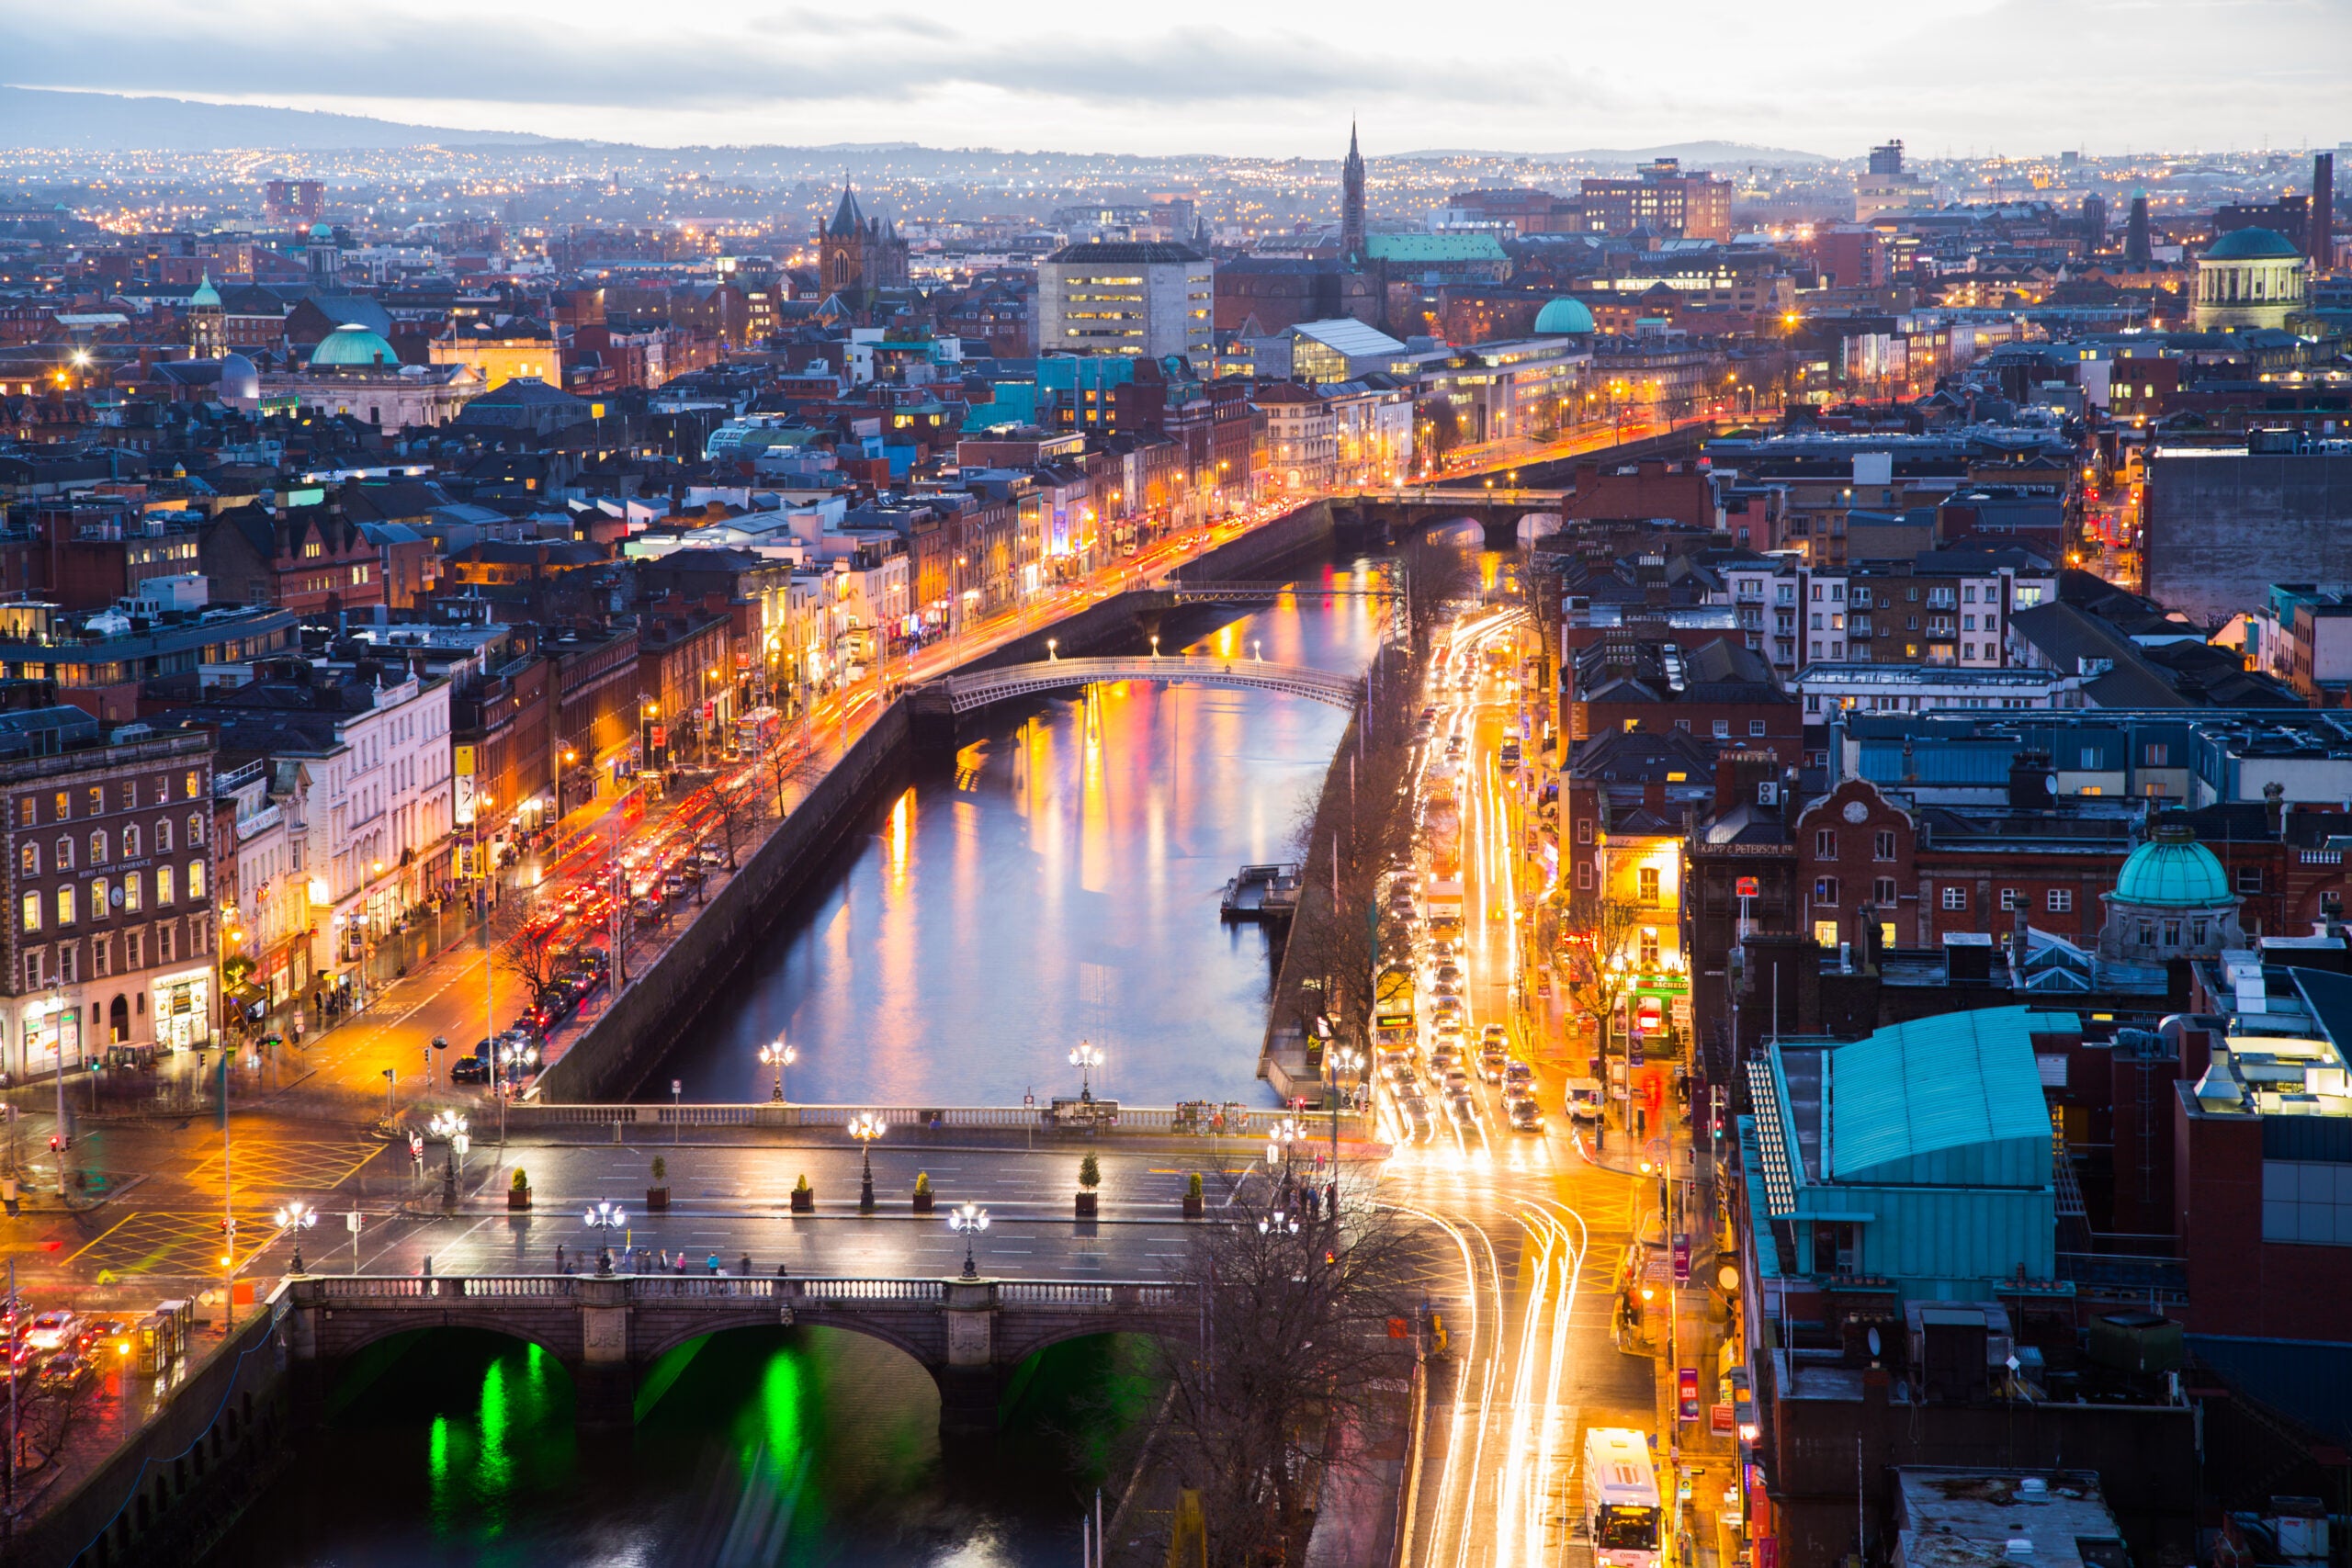 Round-trip flights to Dublin for under $500 this fall